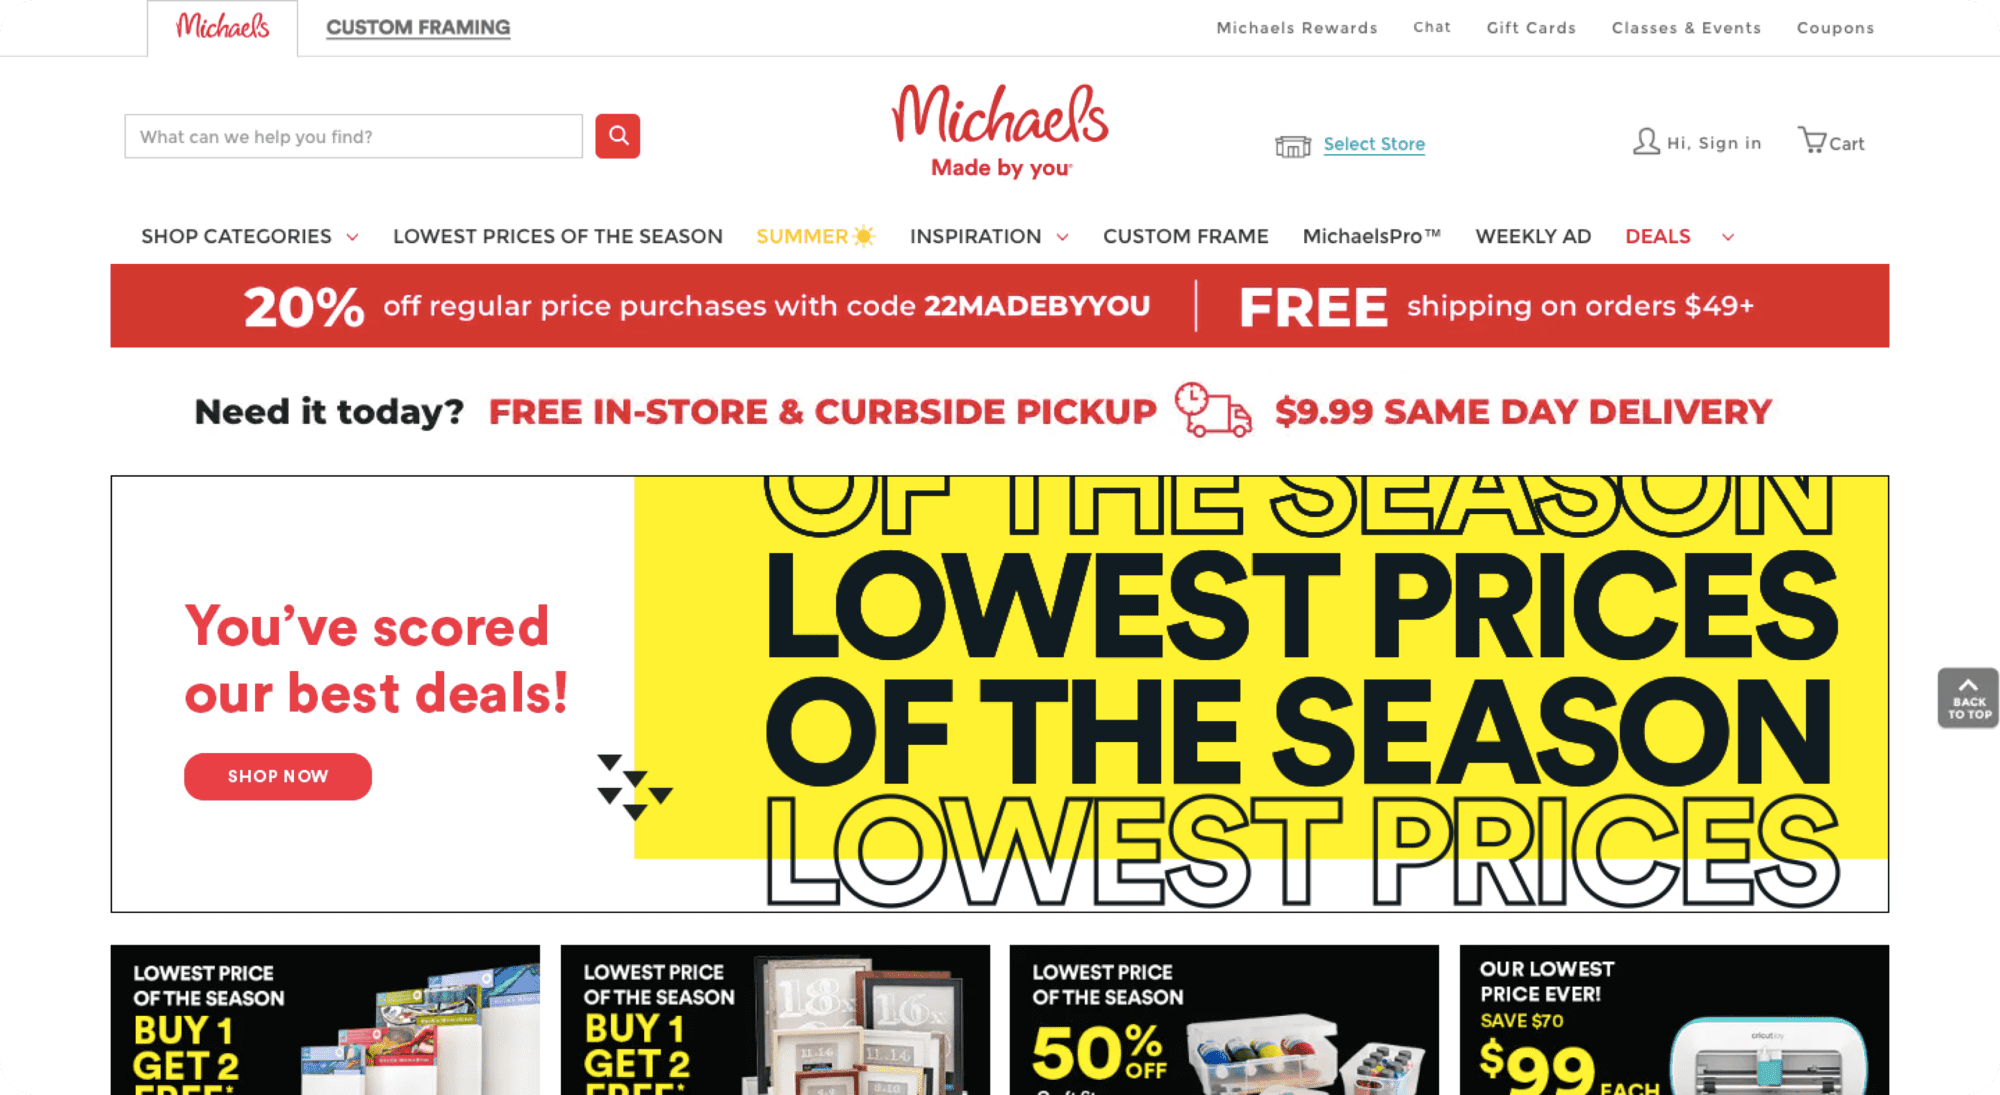 The homepage of Michaels website, which was built with Salesforce Commerce Cloud